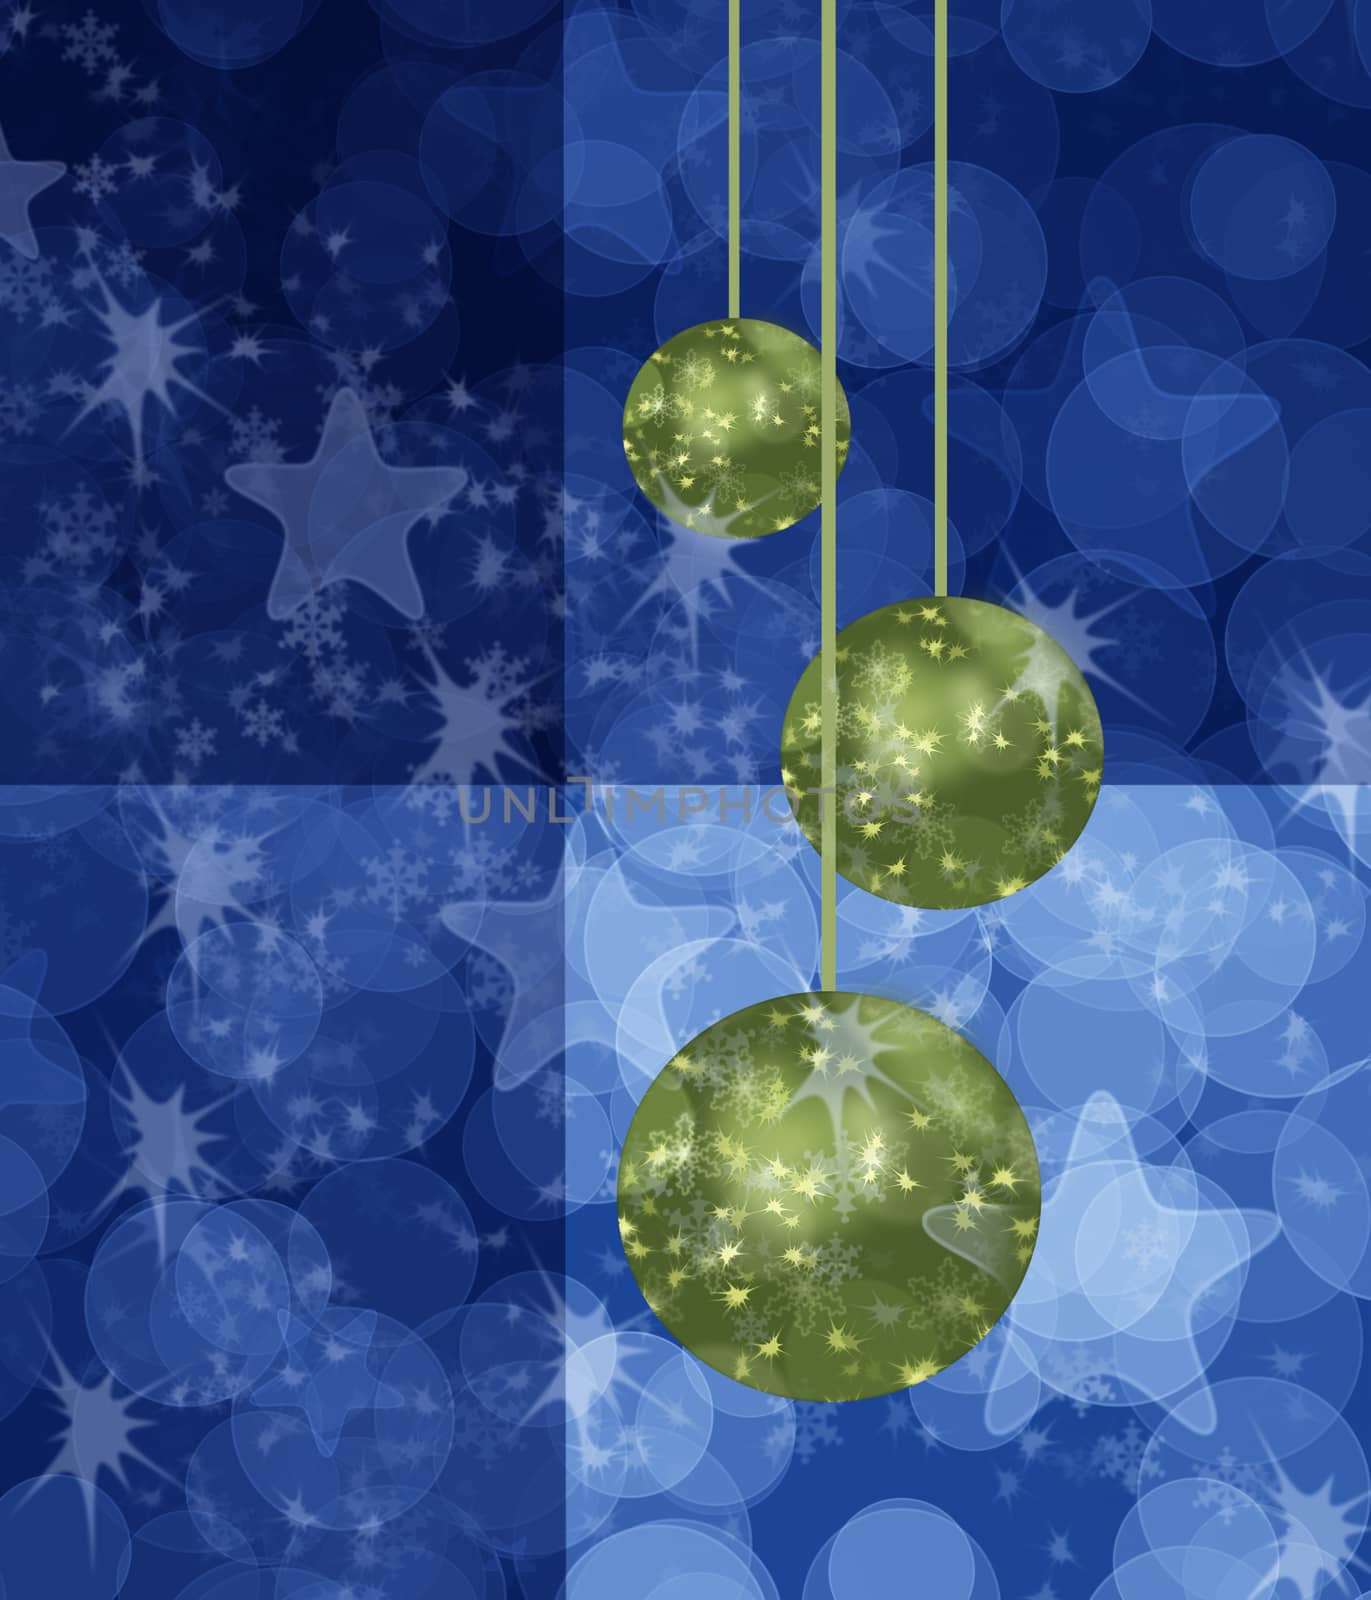 Blue Chistmas card with green bauble balls stars and circles background